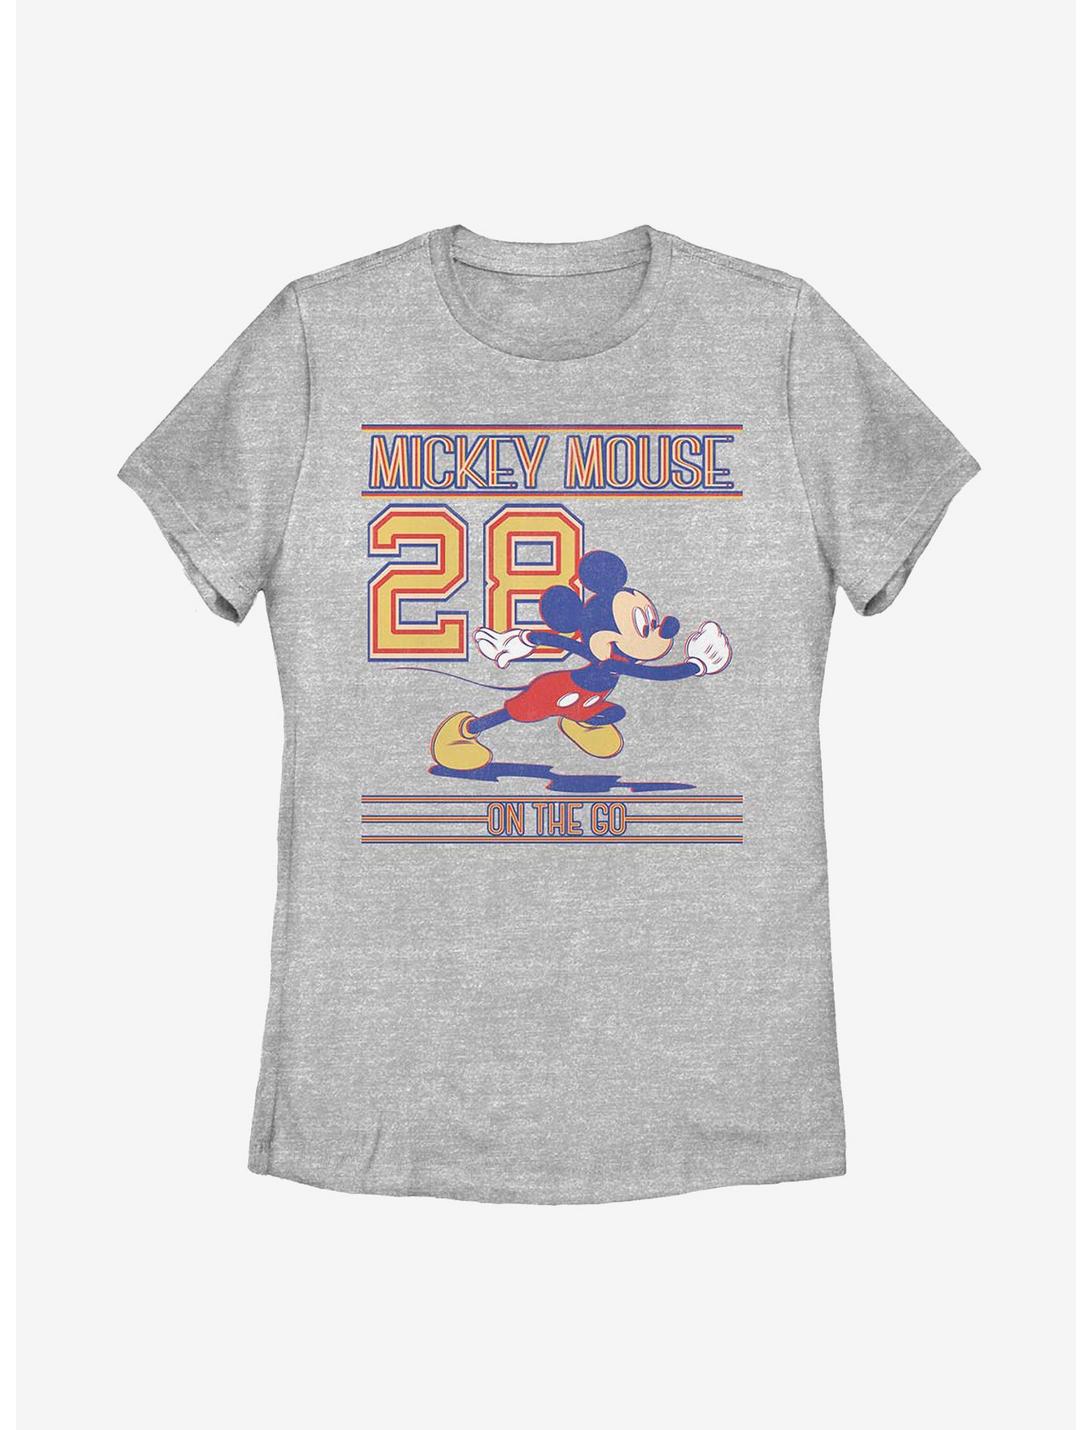 Disney Mickey Mouse Since 28 Womens T-Shirt, ATH HTR, hi-res